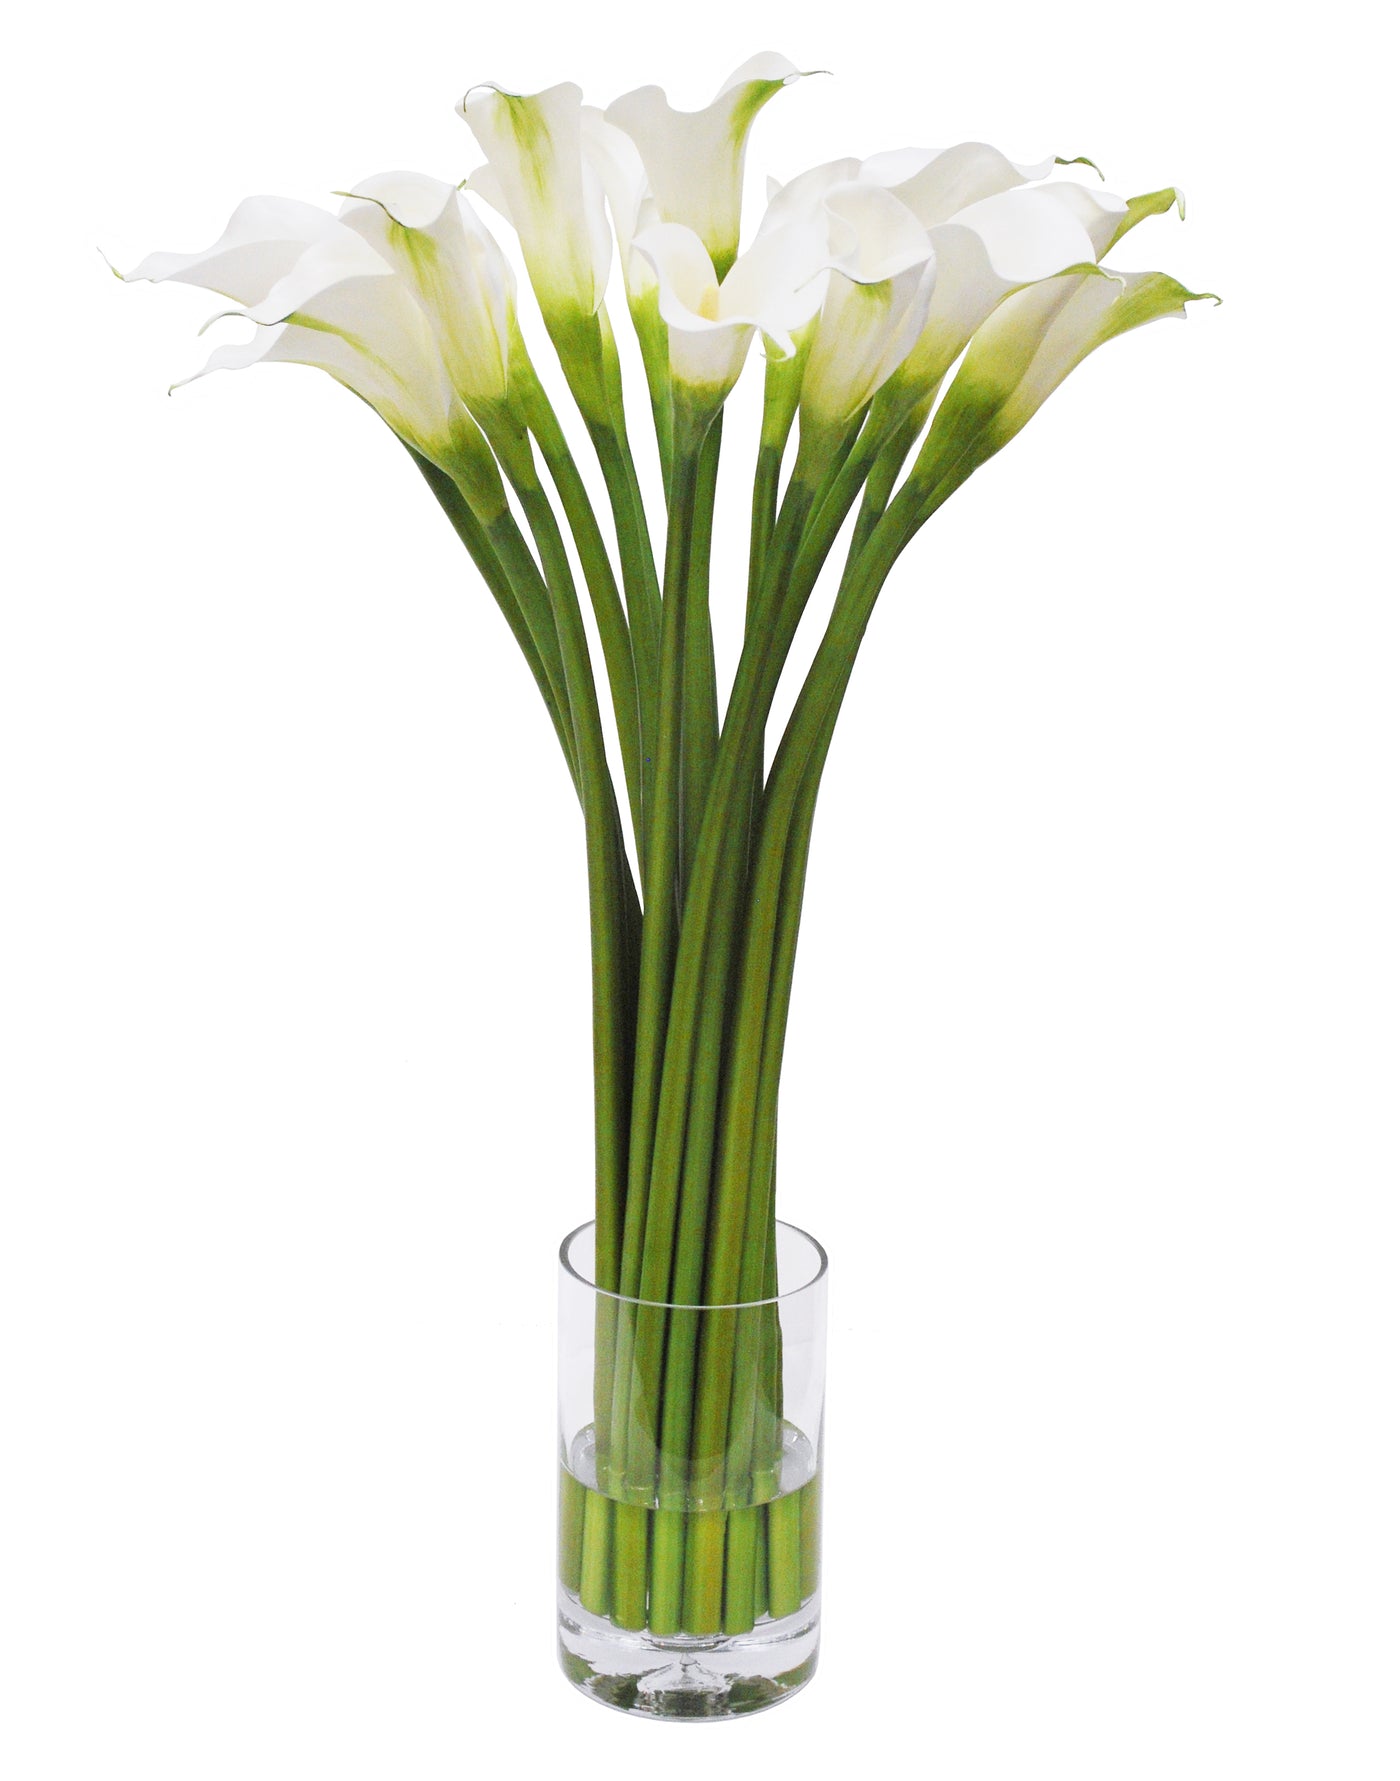 impressive high-quality and realistic tall faux calla lily in a short glass vase